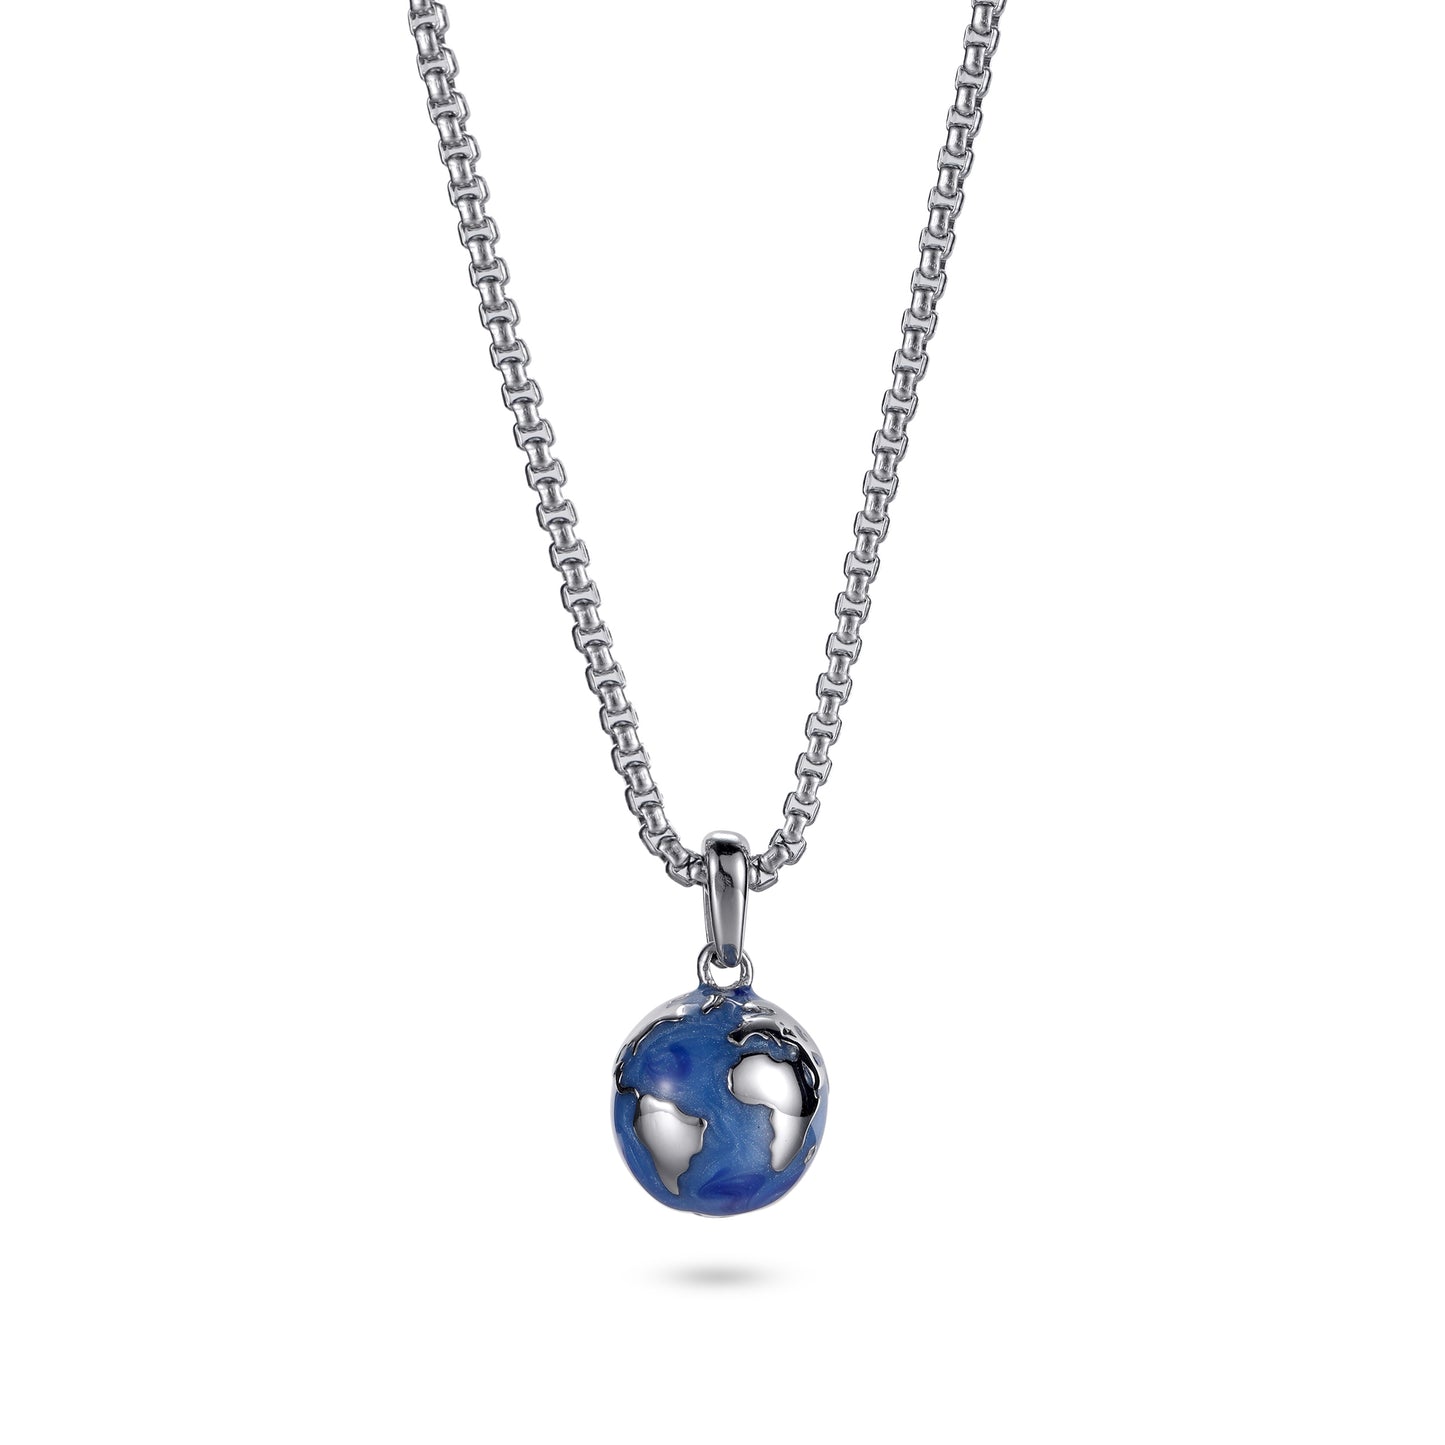 KINGKA Stainless Steel Necklace, Silver Blue, The Earth - KINGKA Jewelry